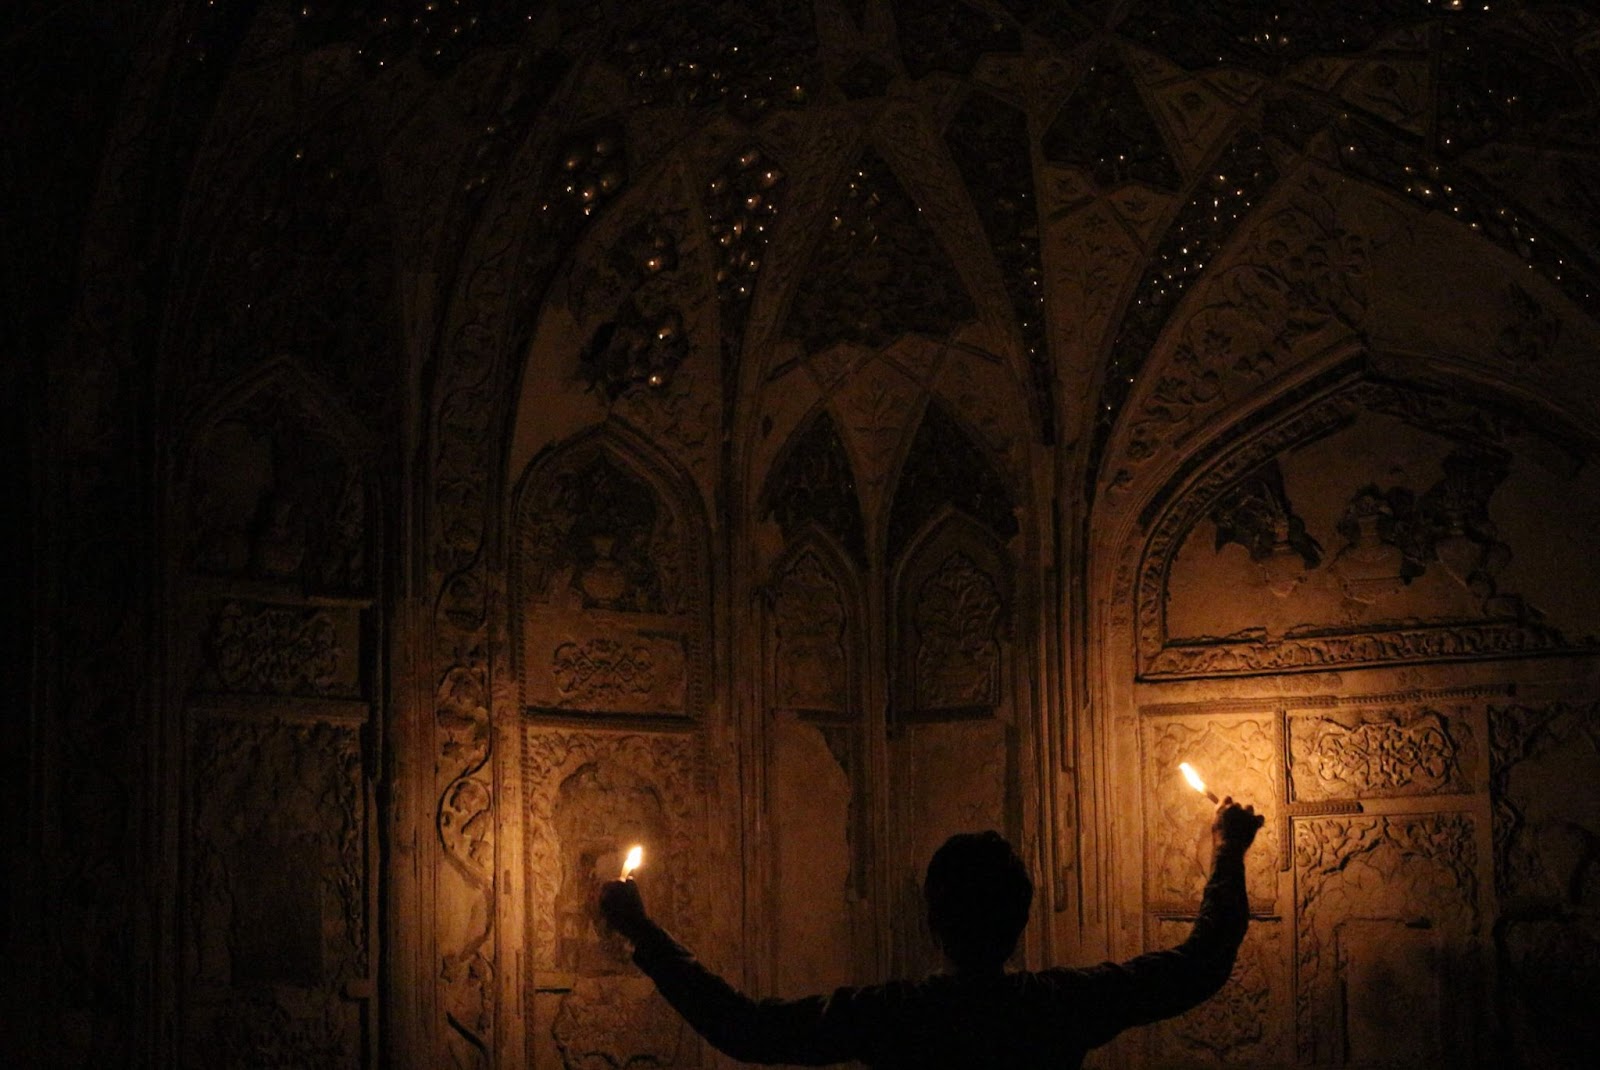 1 day in Agra, Sheesh Mahal, Mirror Palace in Agra Fort, our guide lighting up the palace to show the starry effect on its walls and ceilings